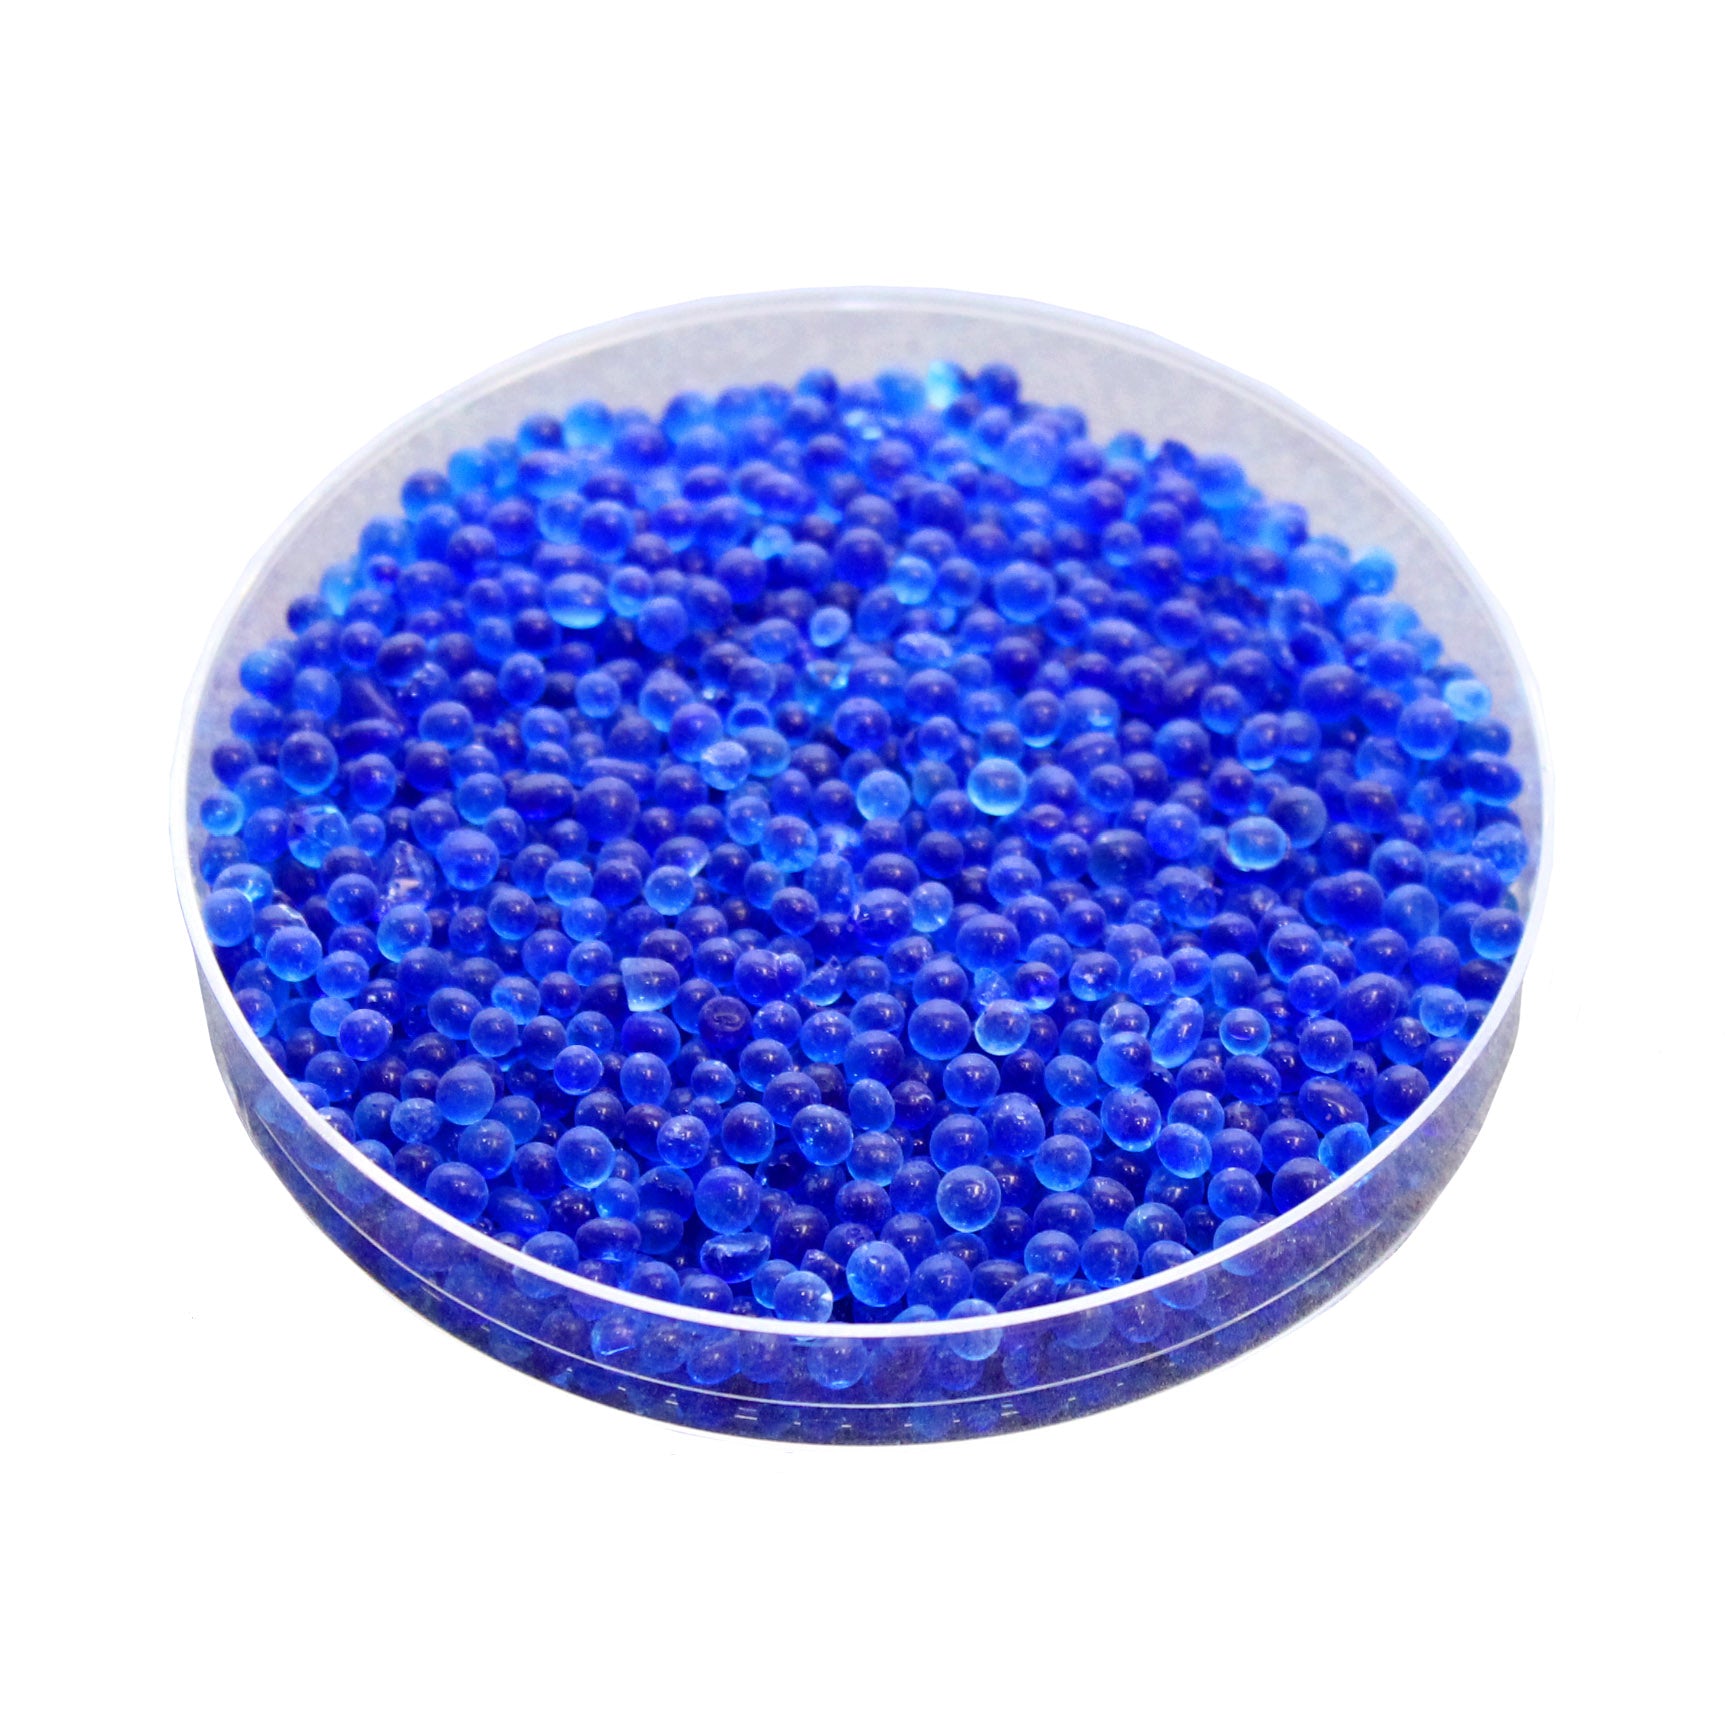 Dry & Dry [1.2 LBS] Blue Premium Indicating Silica Gel Beads(Industry  Standard 3-5 mm) - Reusable Desiccant Beads Silica Gel Desiccant